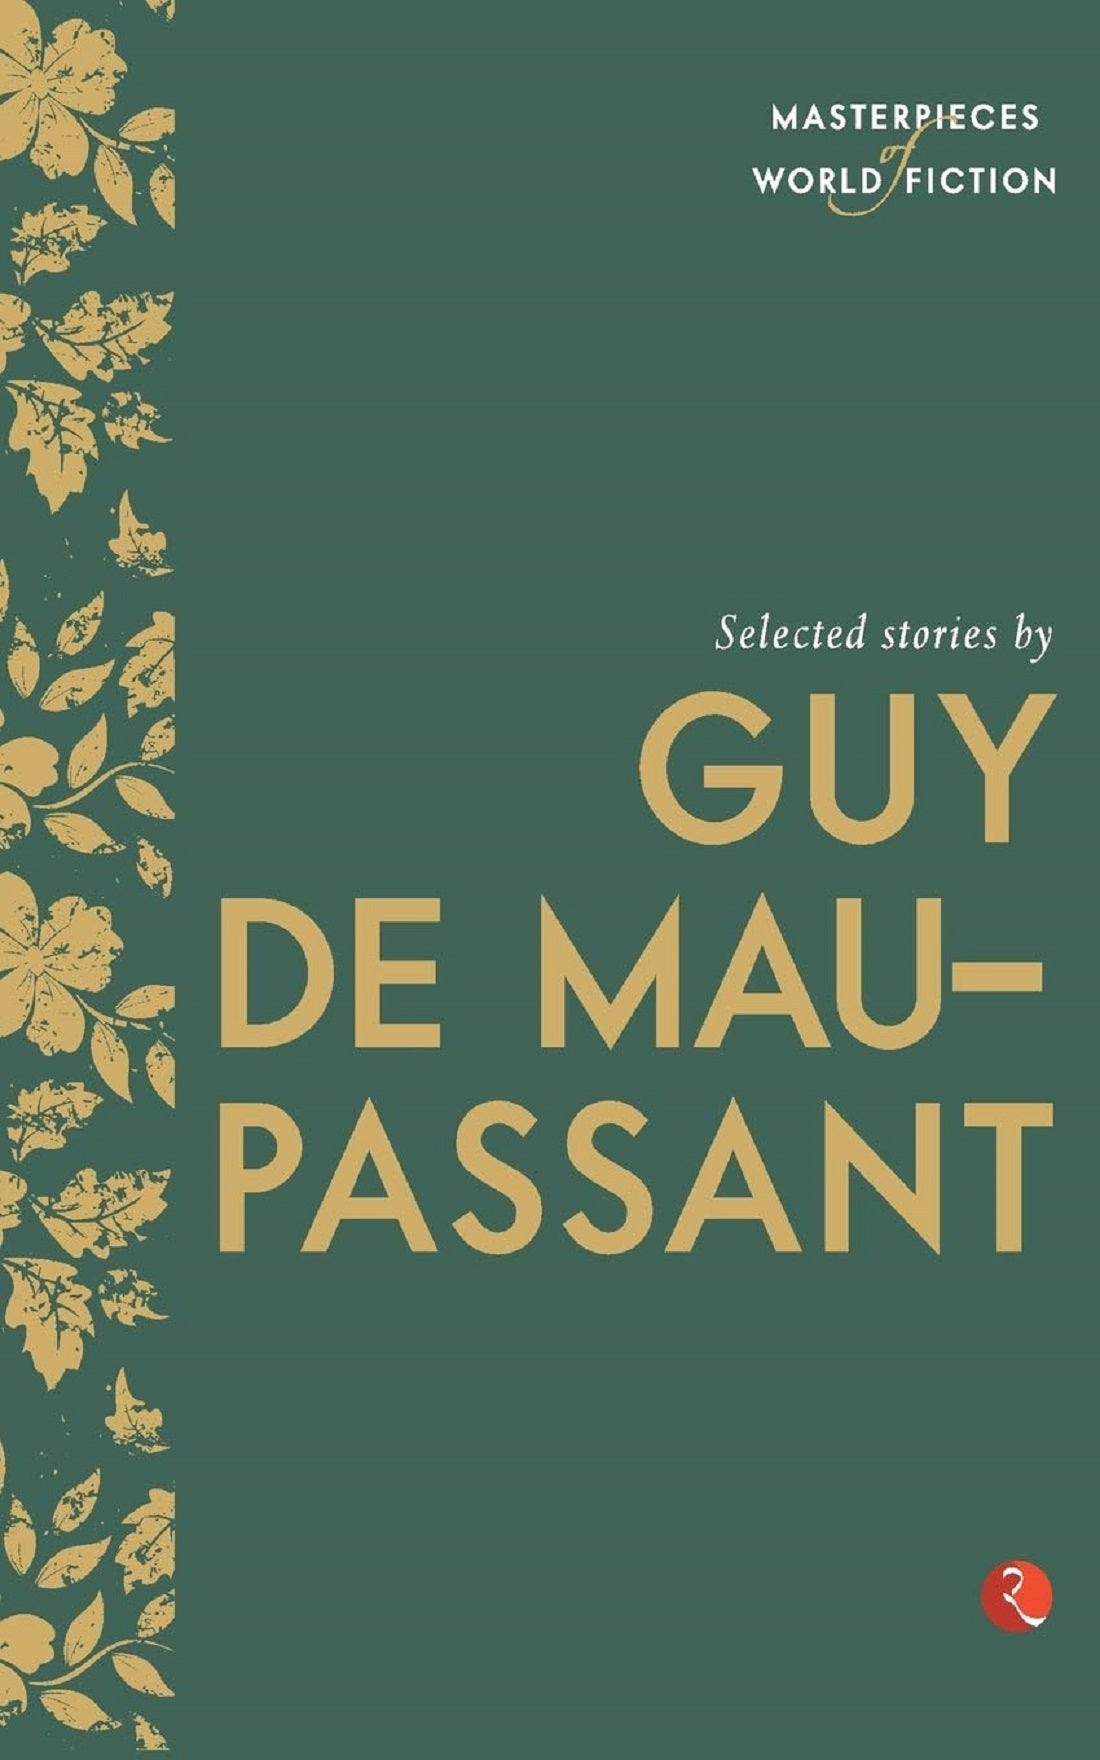 SELECTED STORIES BY GUY DE MAUPASSANT